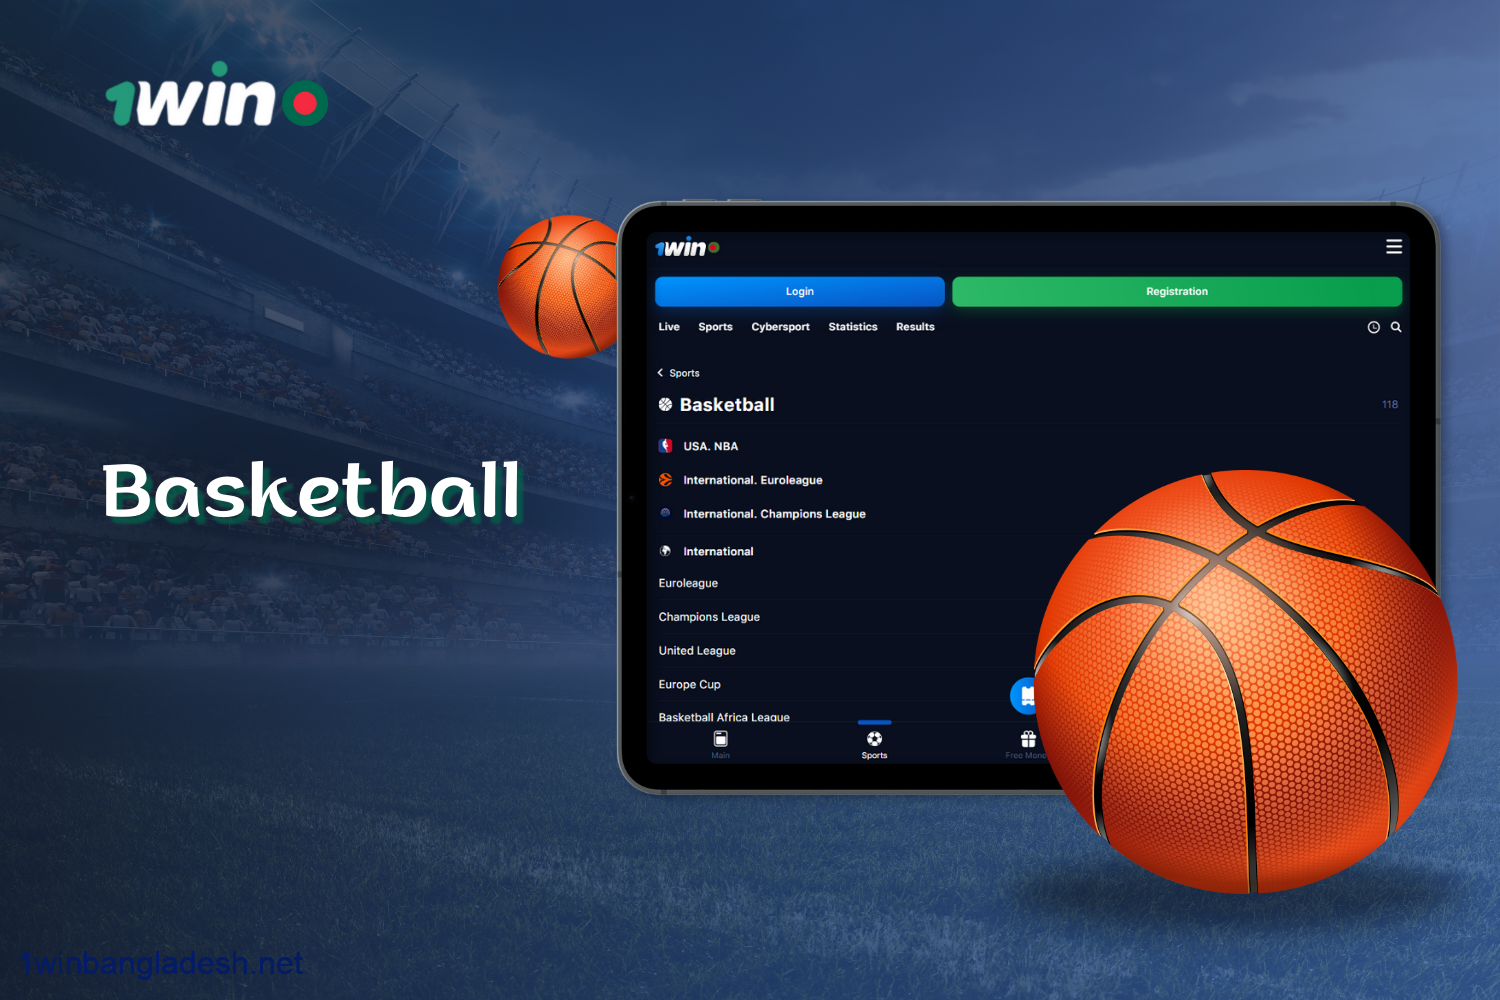 1win offers a wide range of Basketball betting options in the Sports section for players from Bangladesh